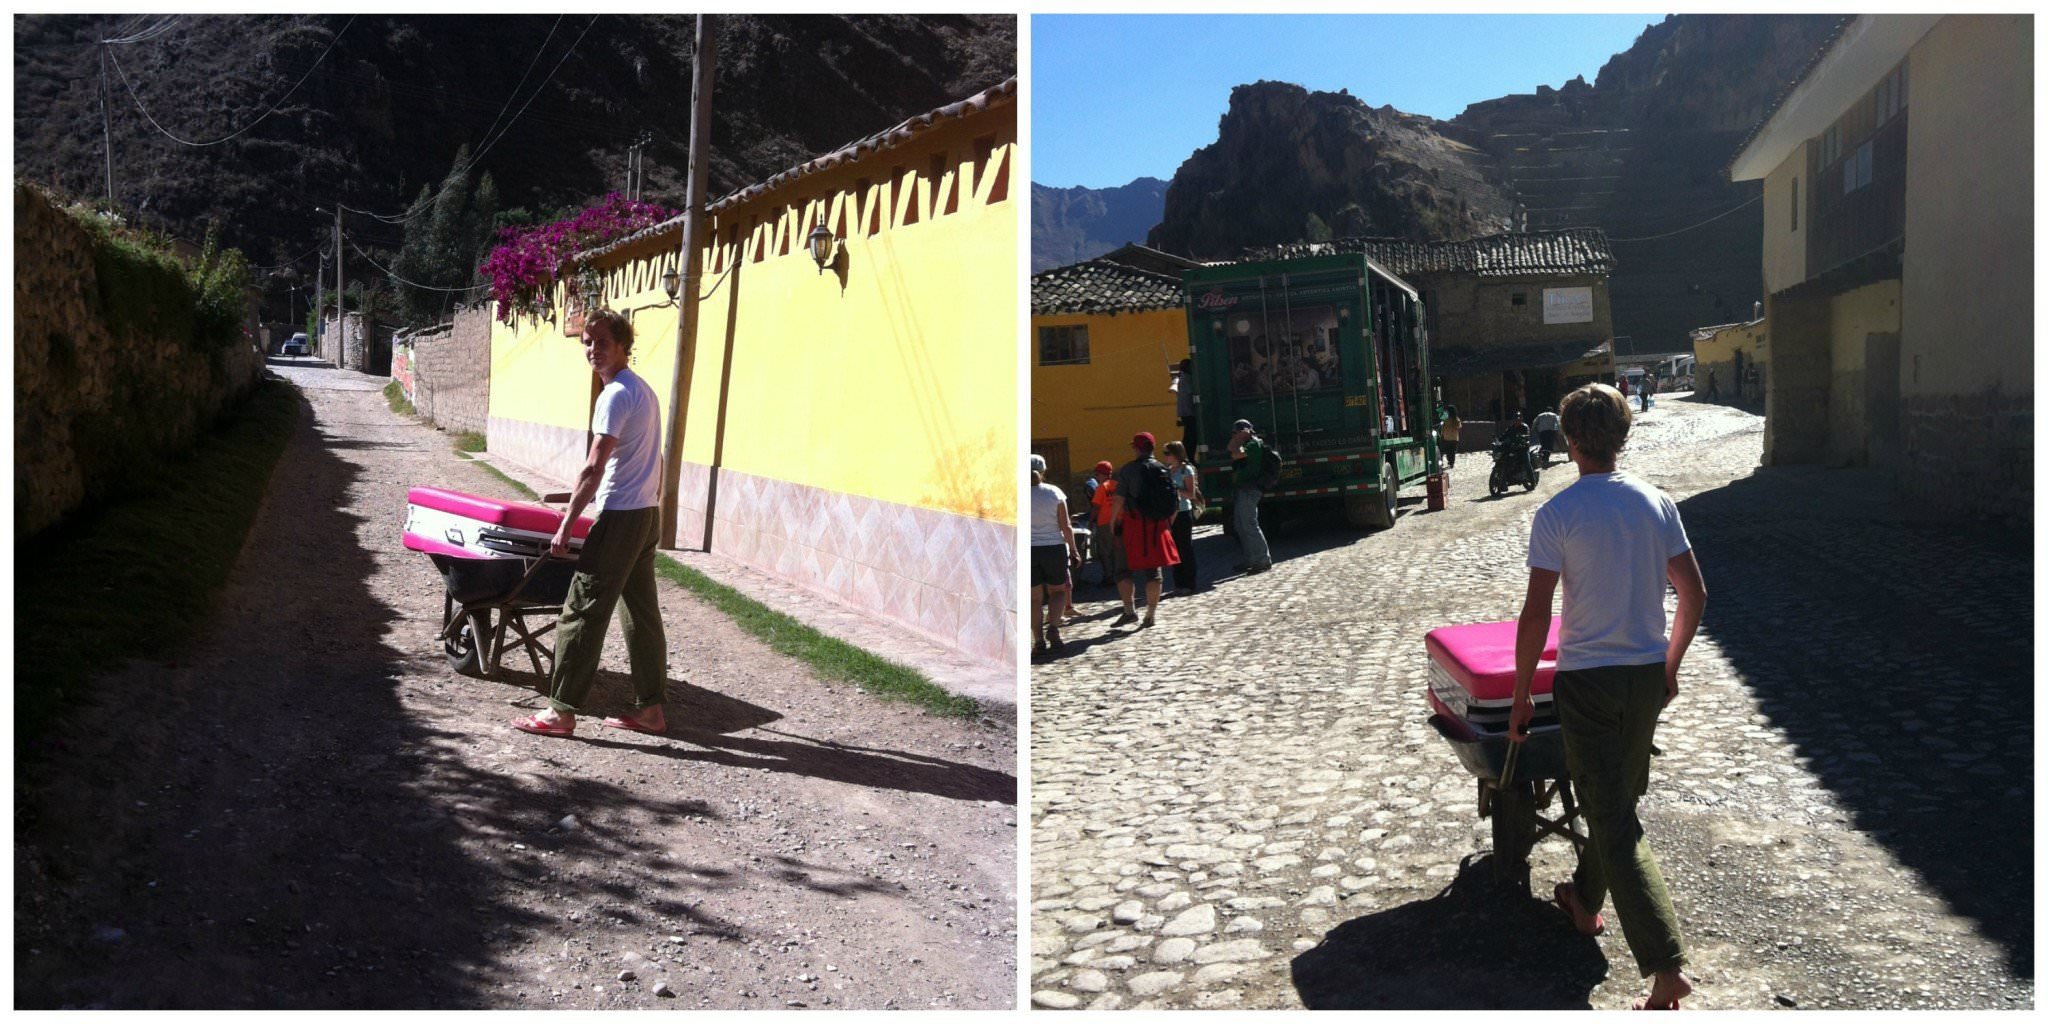 sustainable travel lifestyle - Our massage business in Ollantaytambo, Peru